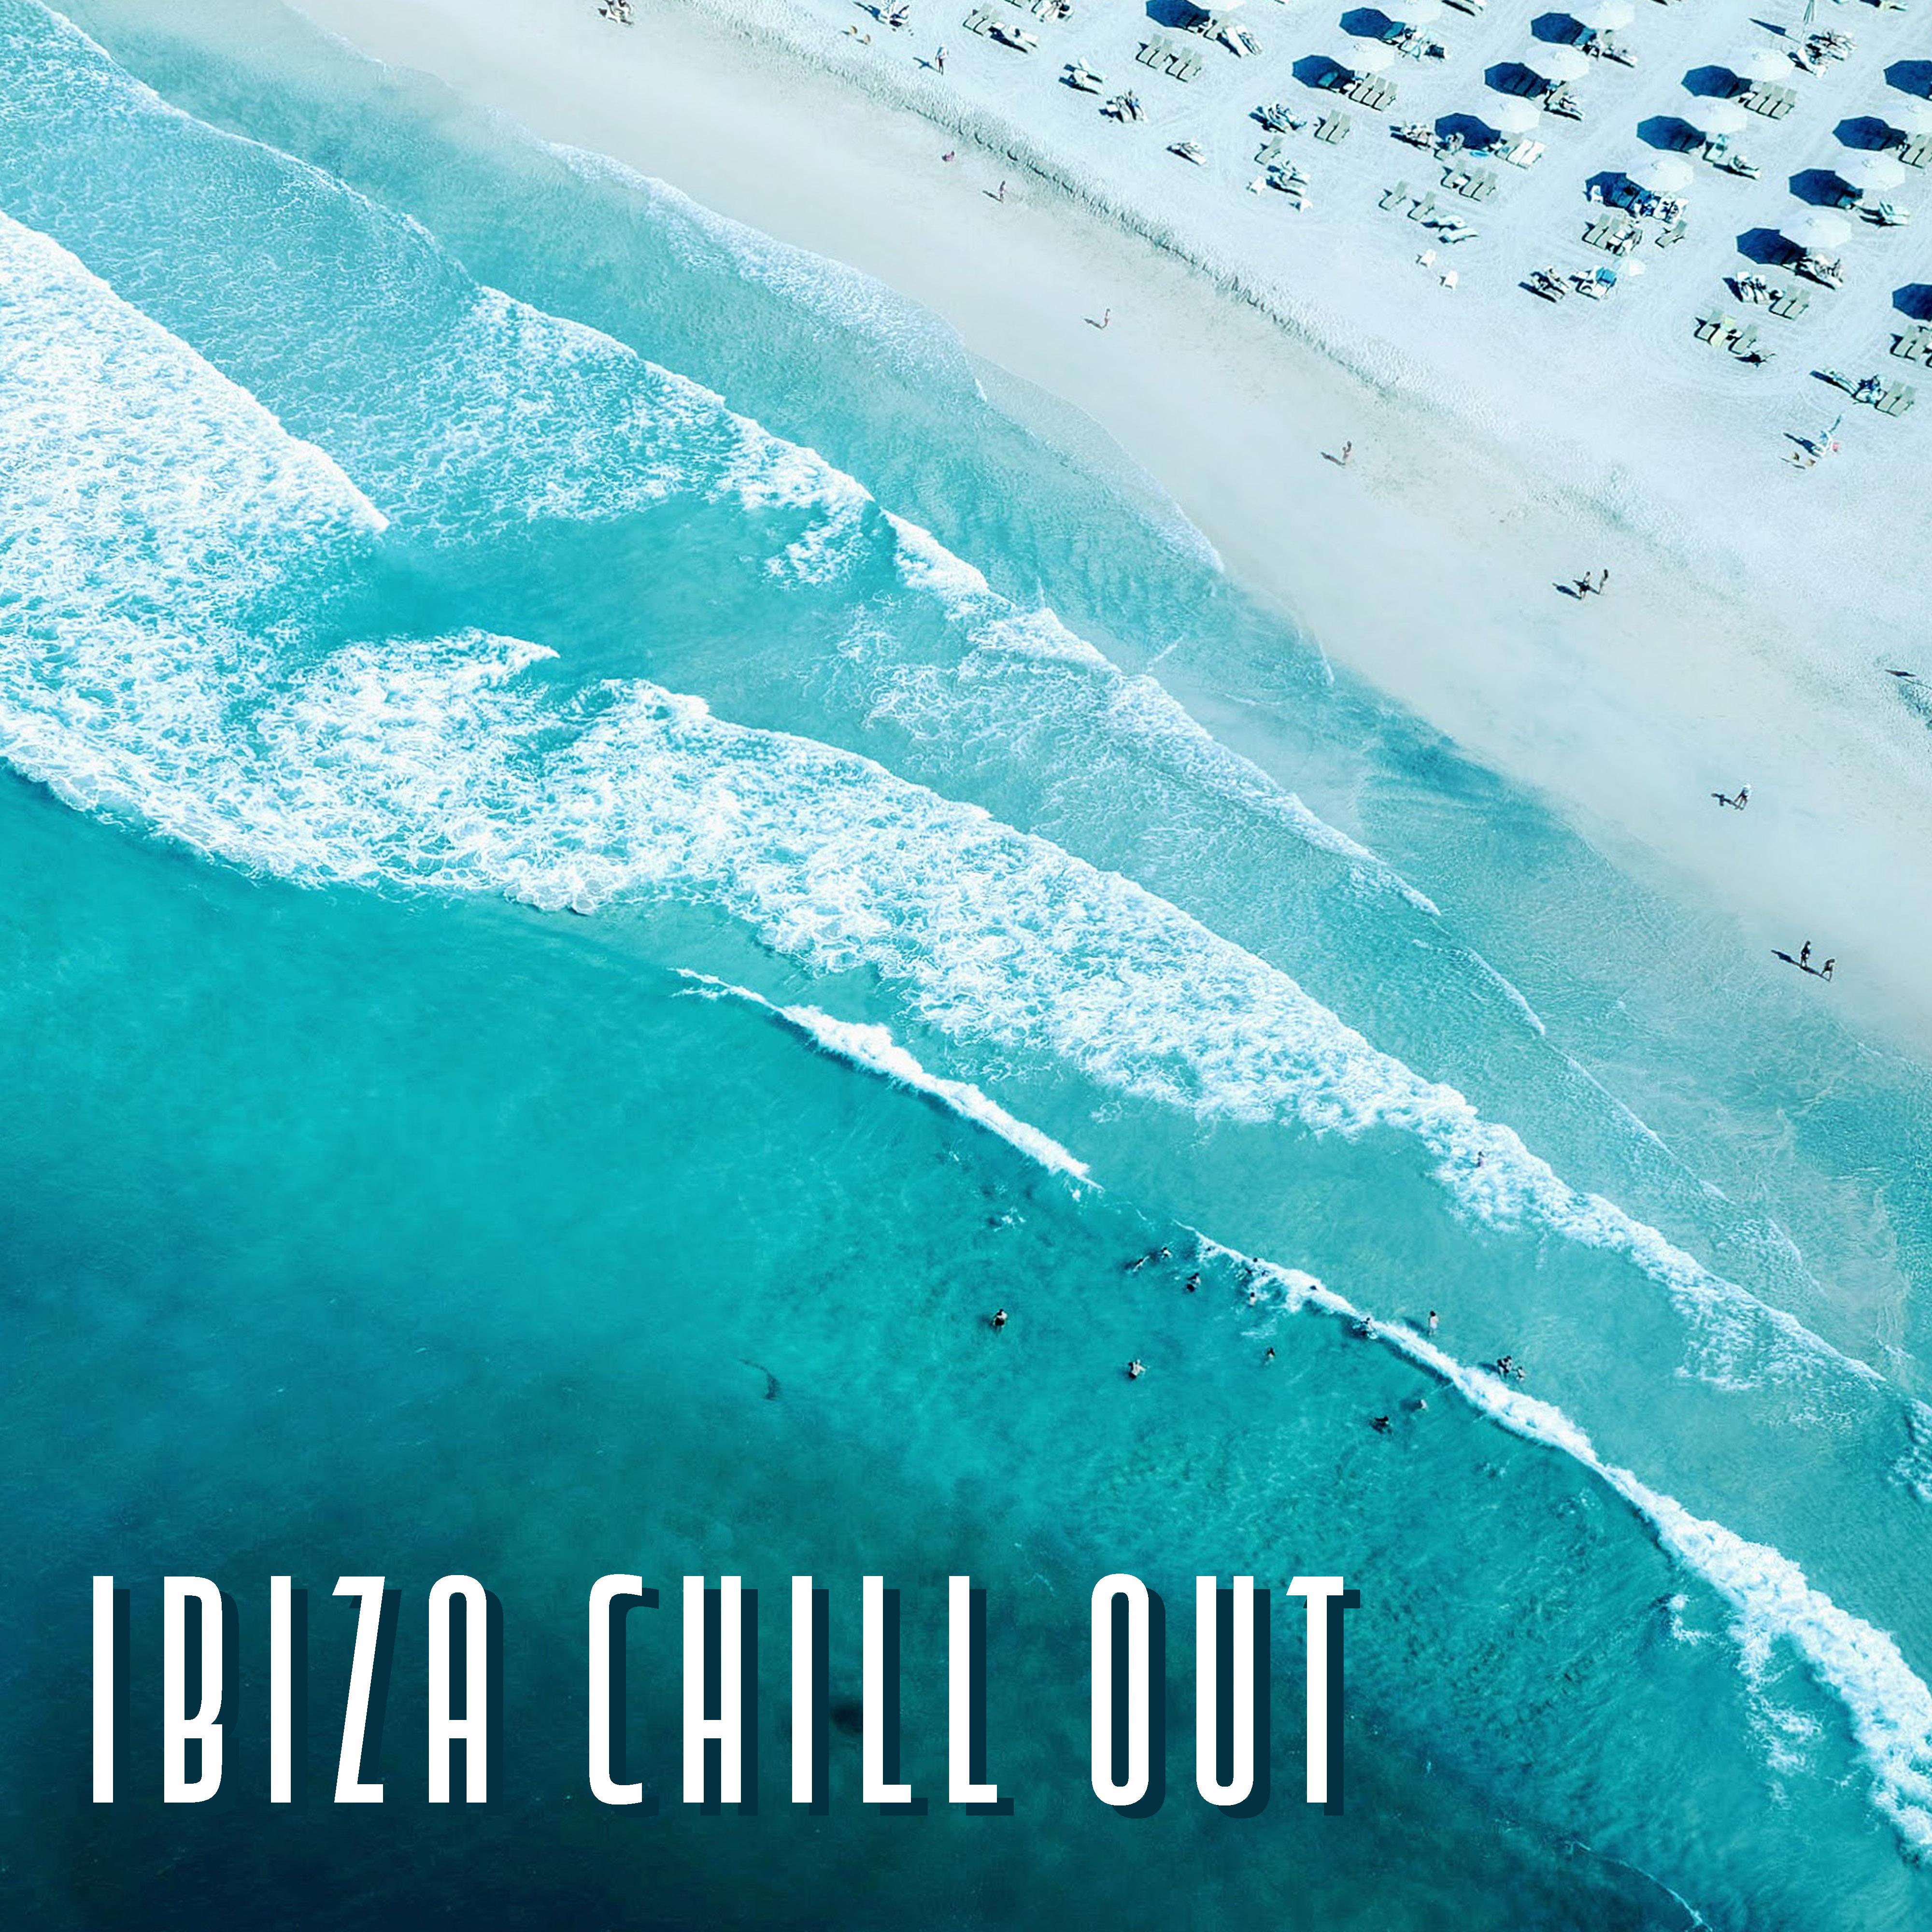 Ibiza Chill Out – Relaxation, Beach Chill, Ibiza Lounge, Sunrise, Cocktails & Drinks Under Palms, Pure Rest